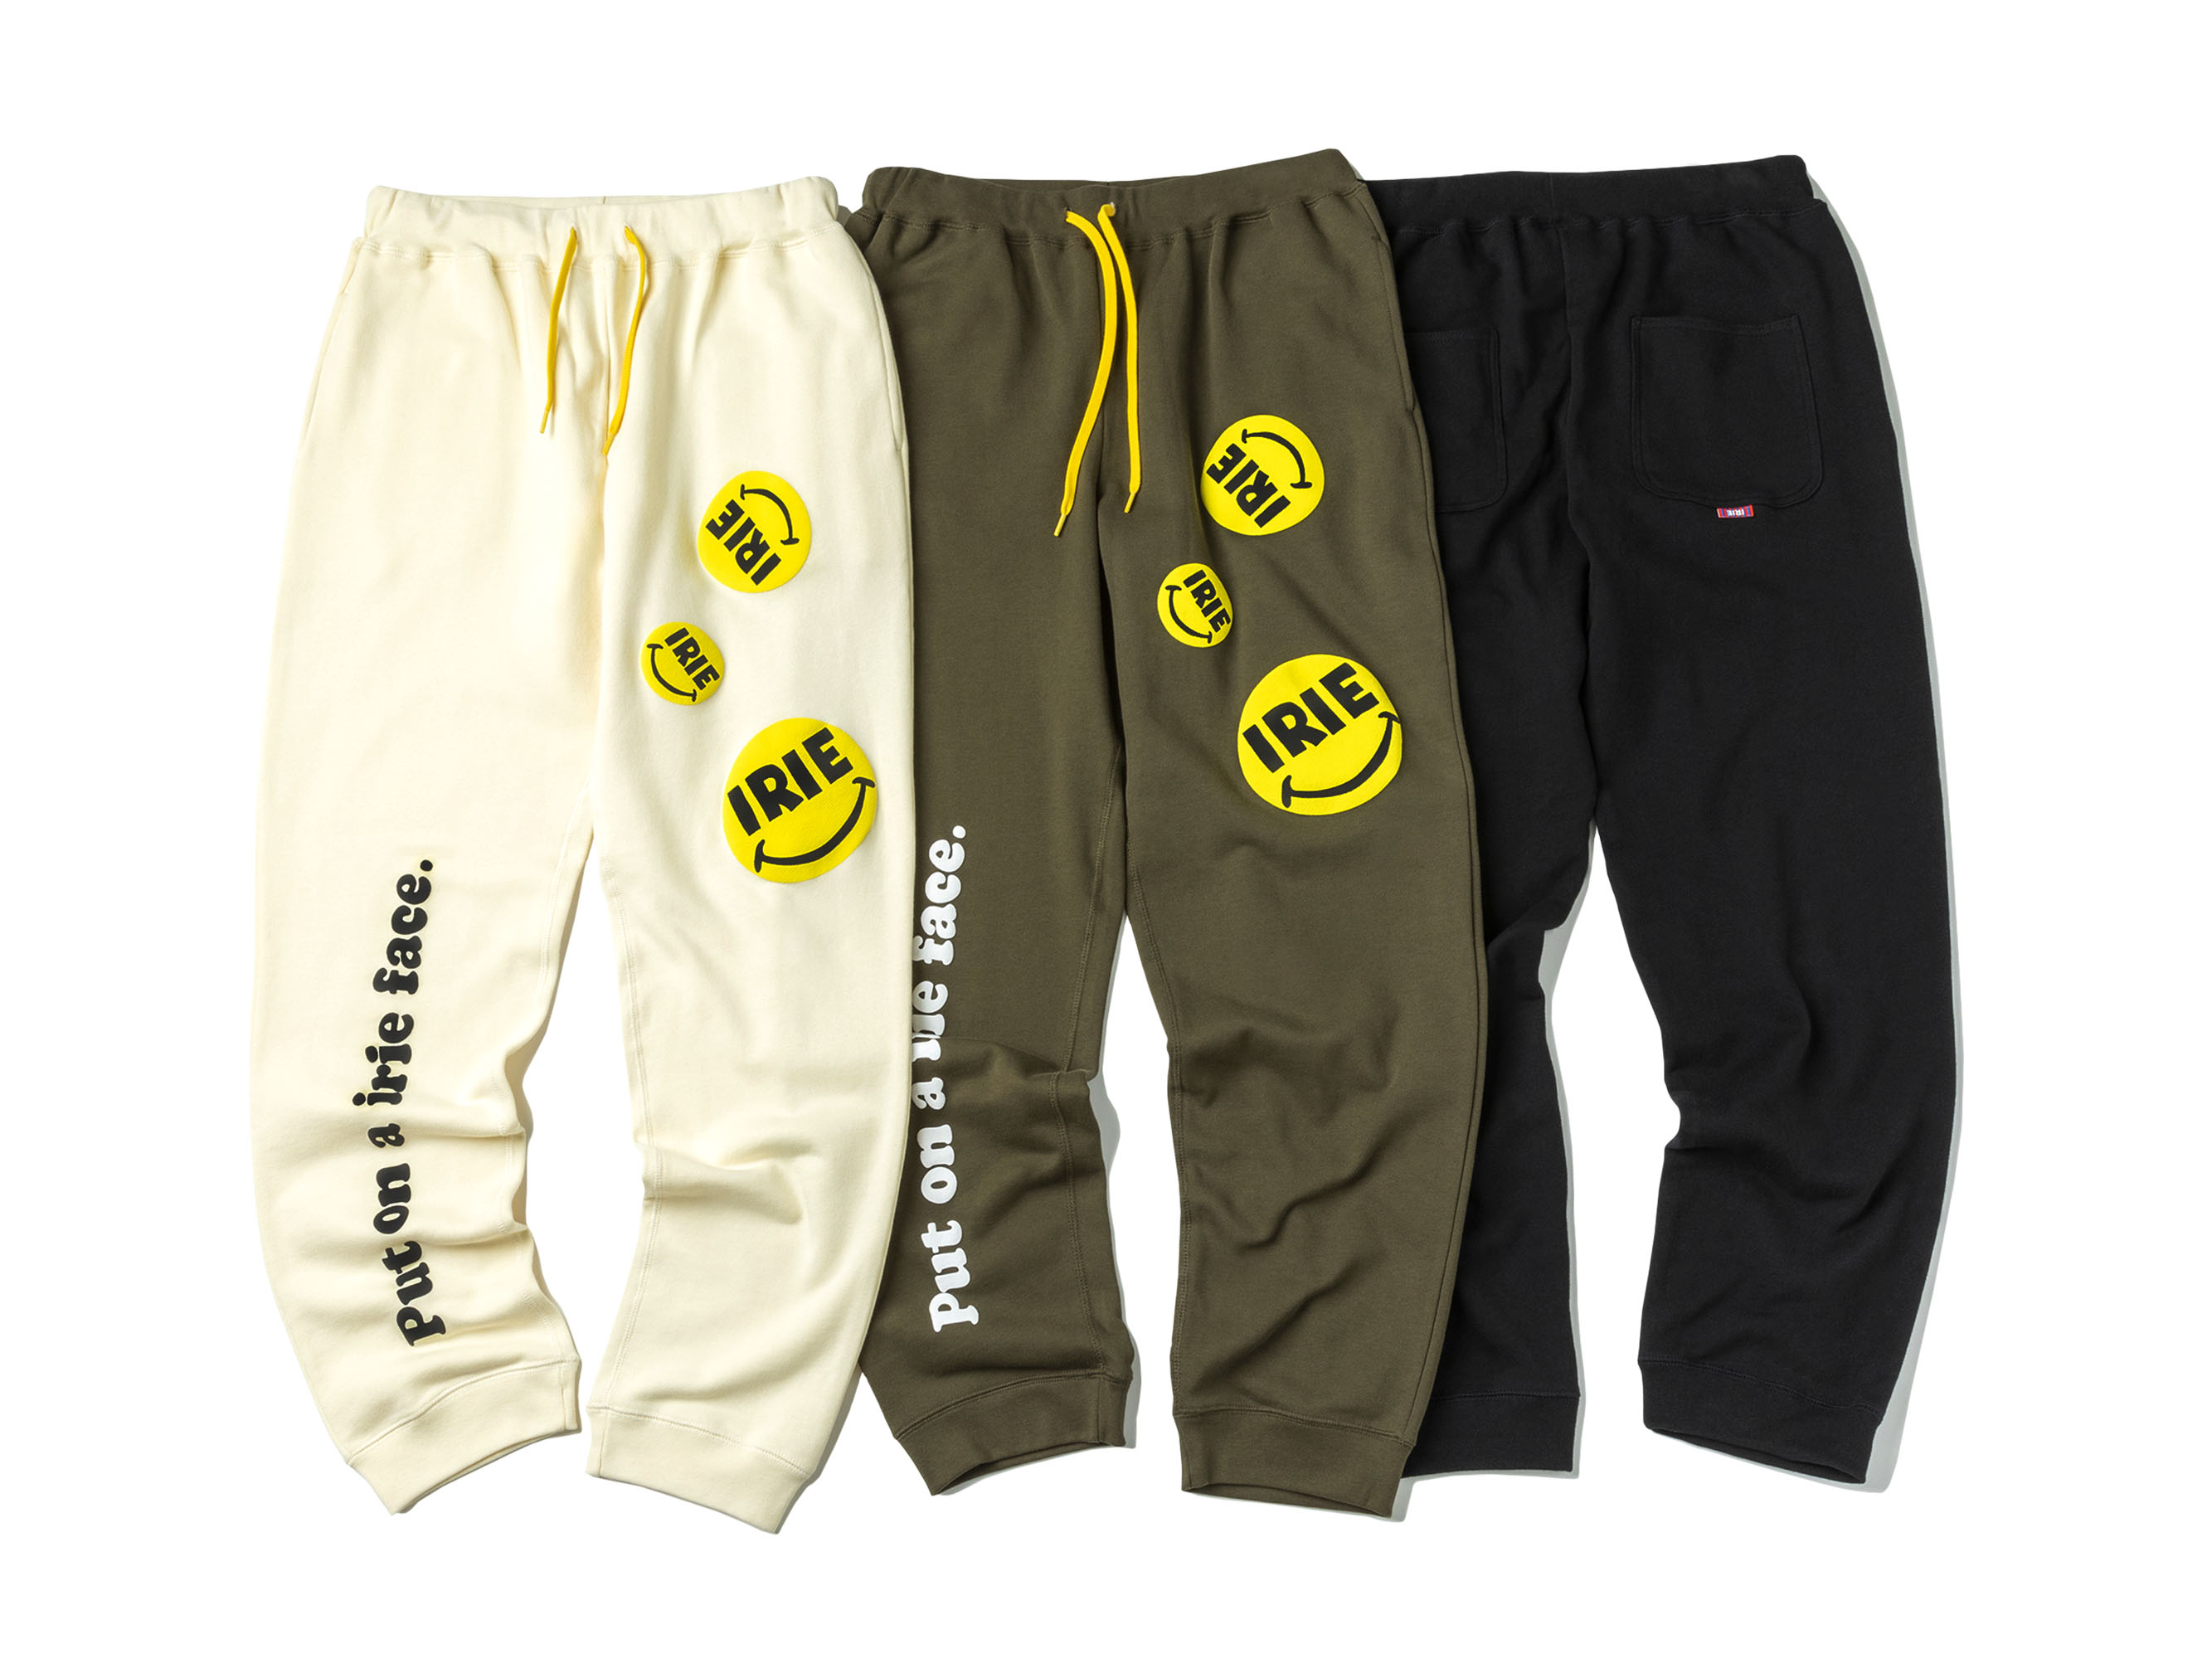 IRIE FACE SWEAT PANTS - IRIE by irielife